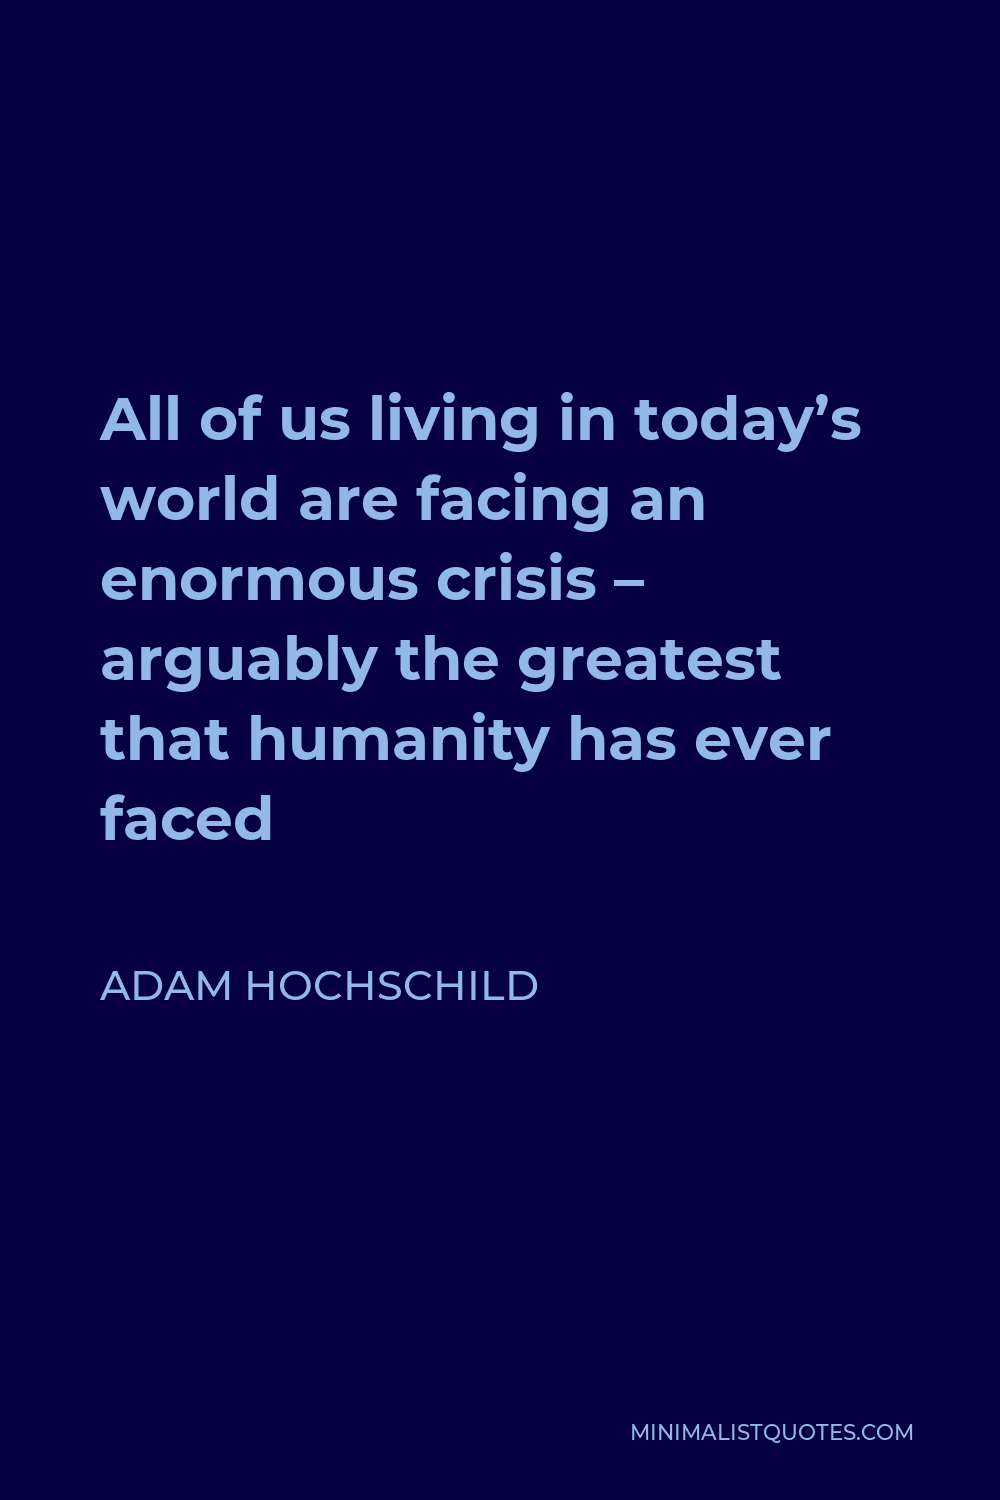 Adam Hochschild Quote - All of us living in today’s world are facing an enormous crisis – arguably the greatest that humanity has ever faced